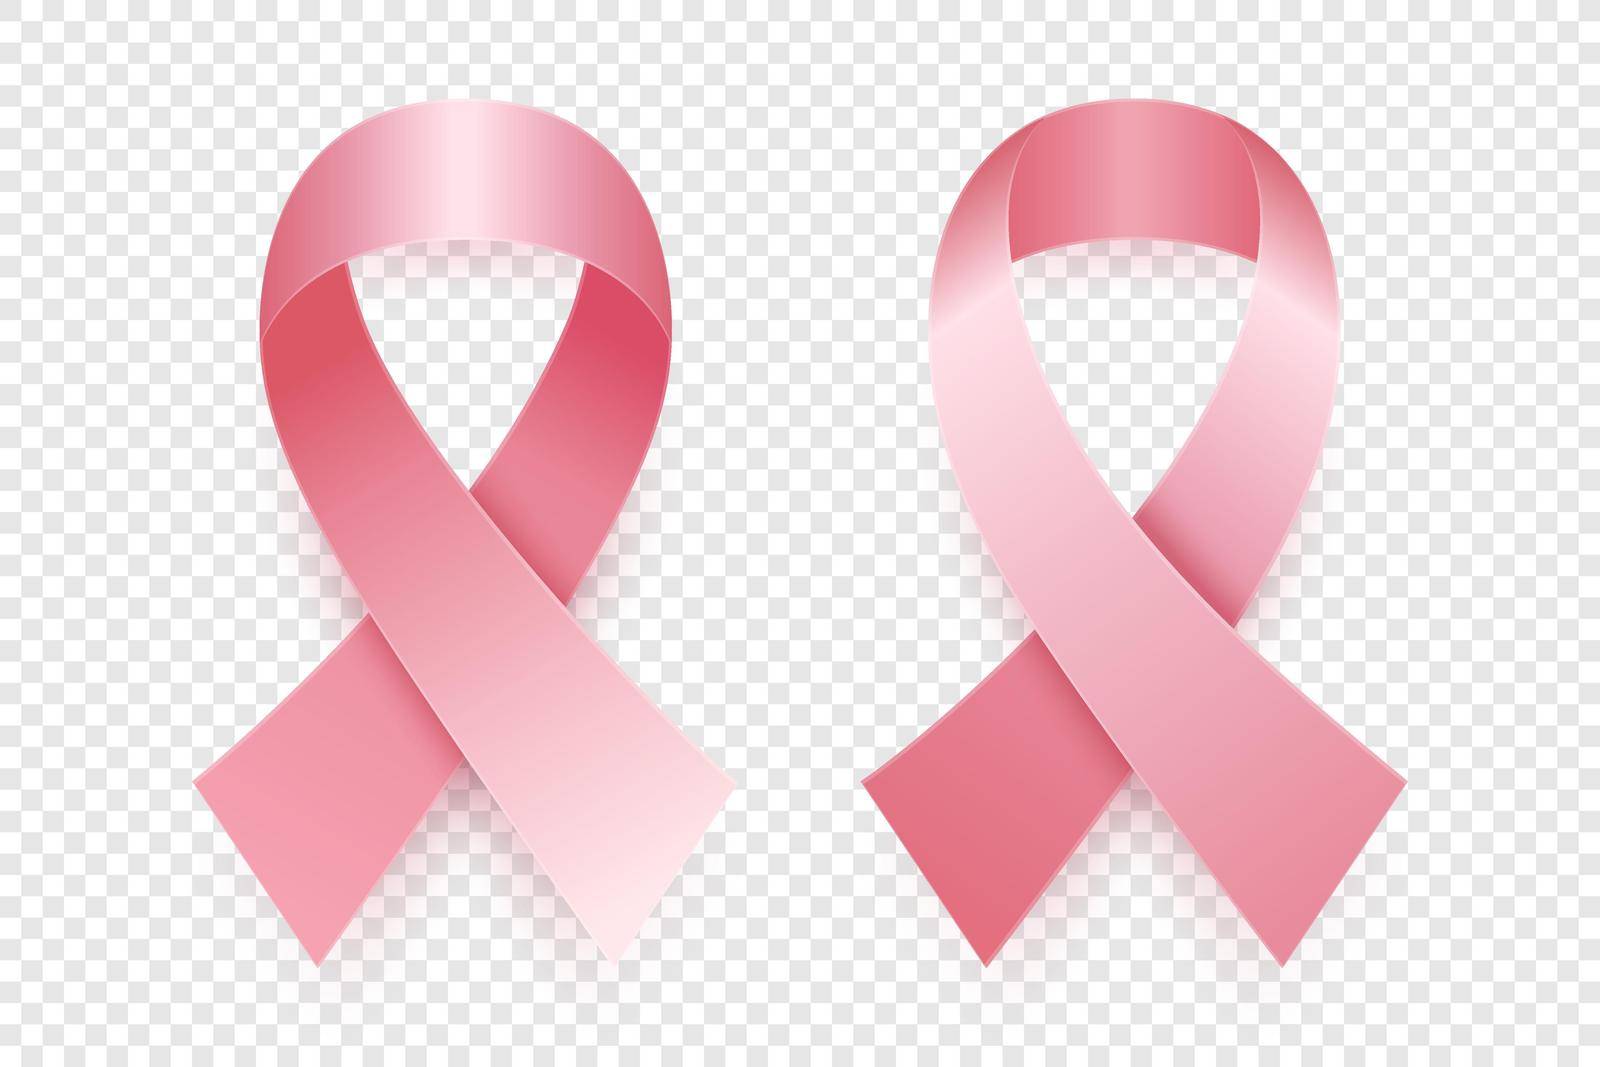 Vector 3d Realistic Pink Ribbon Set. Breast Cancer Awareness Symbol Closeup. Cancer Ribbon Template. World Breast Cancer Day Concept.